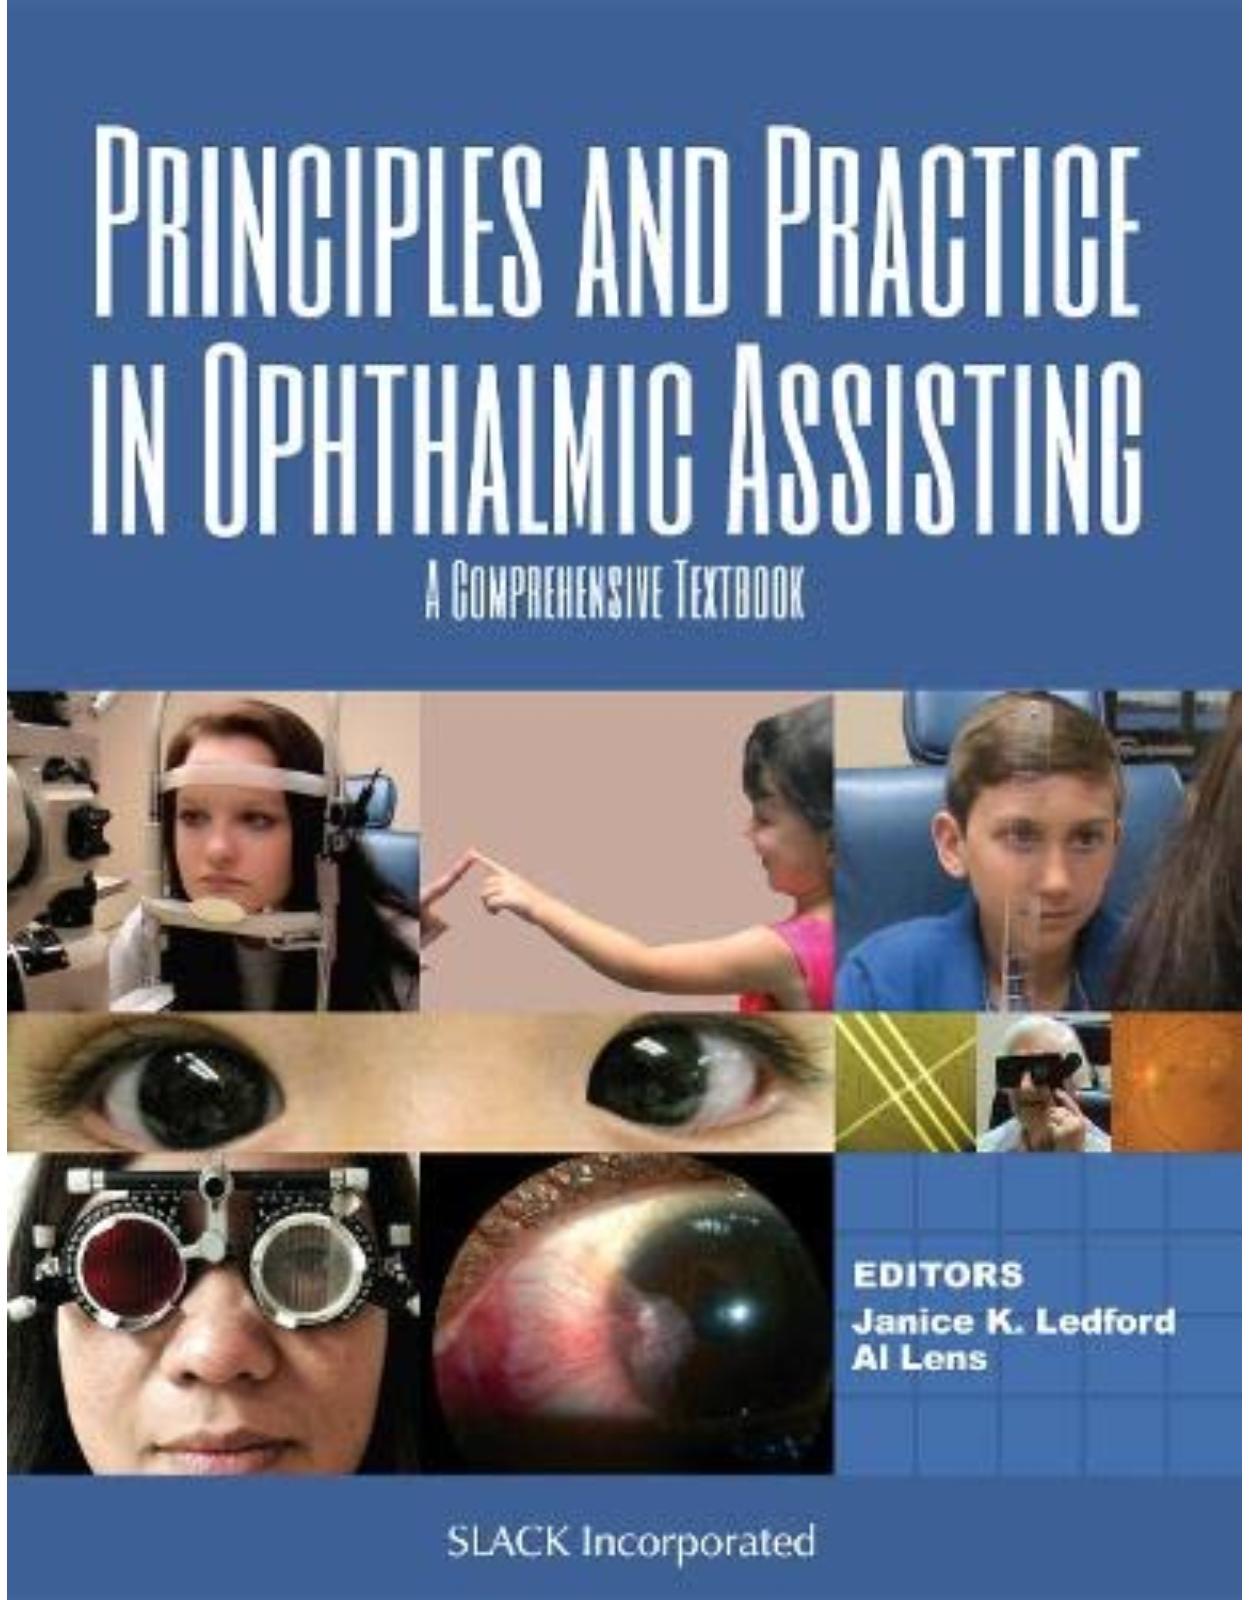 Principles and Practice in Ophthalmic Assisting